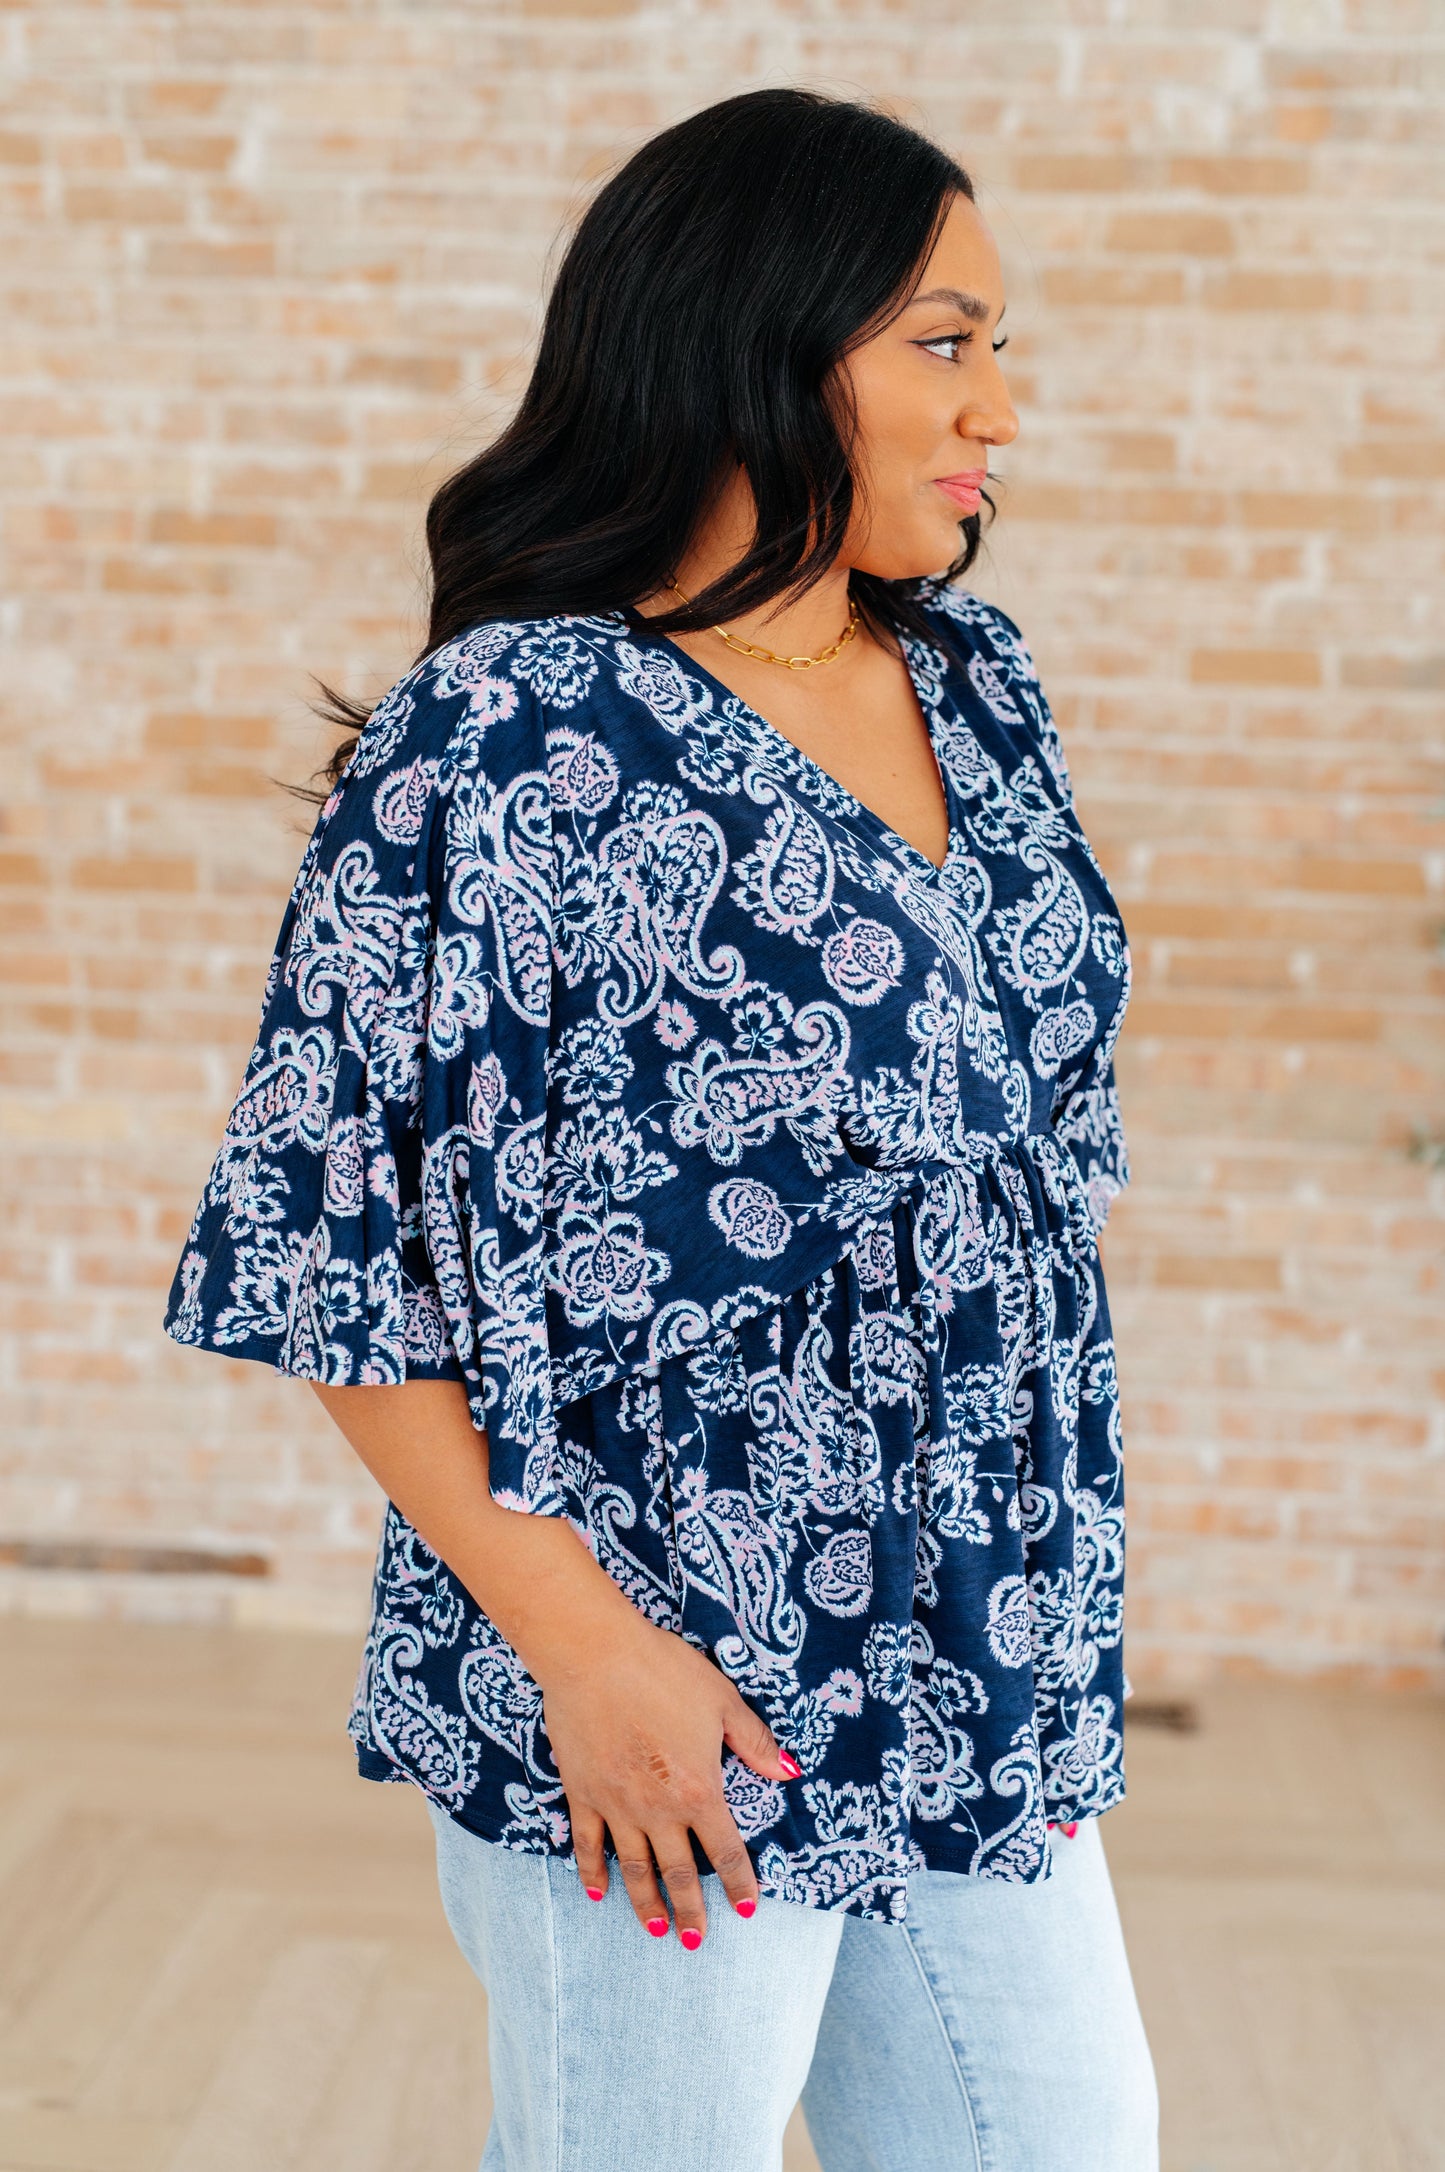 Peplum Top in Navy and Pink Paisley